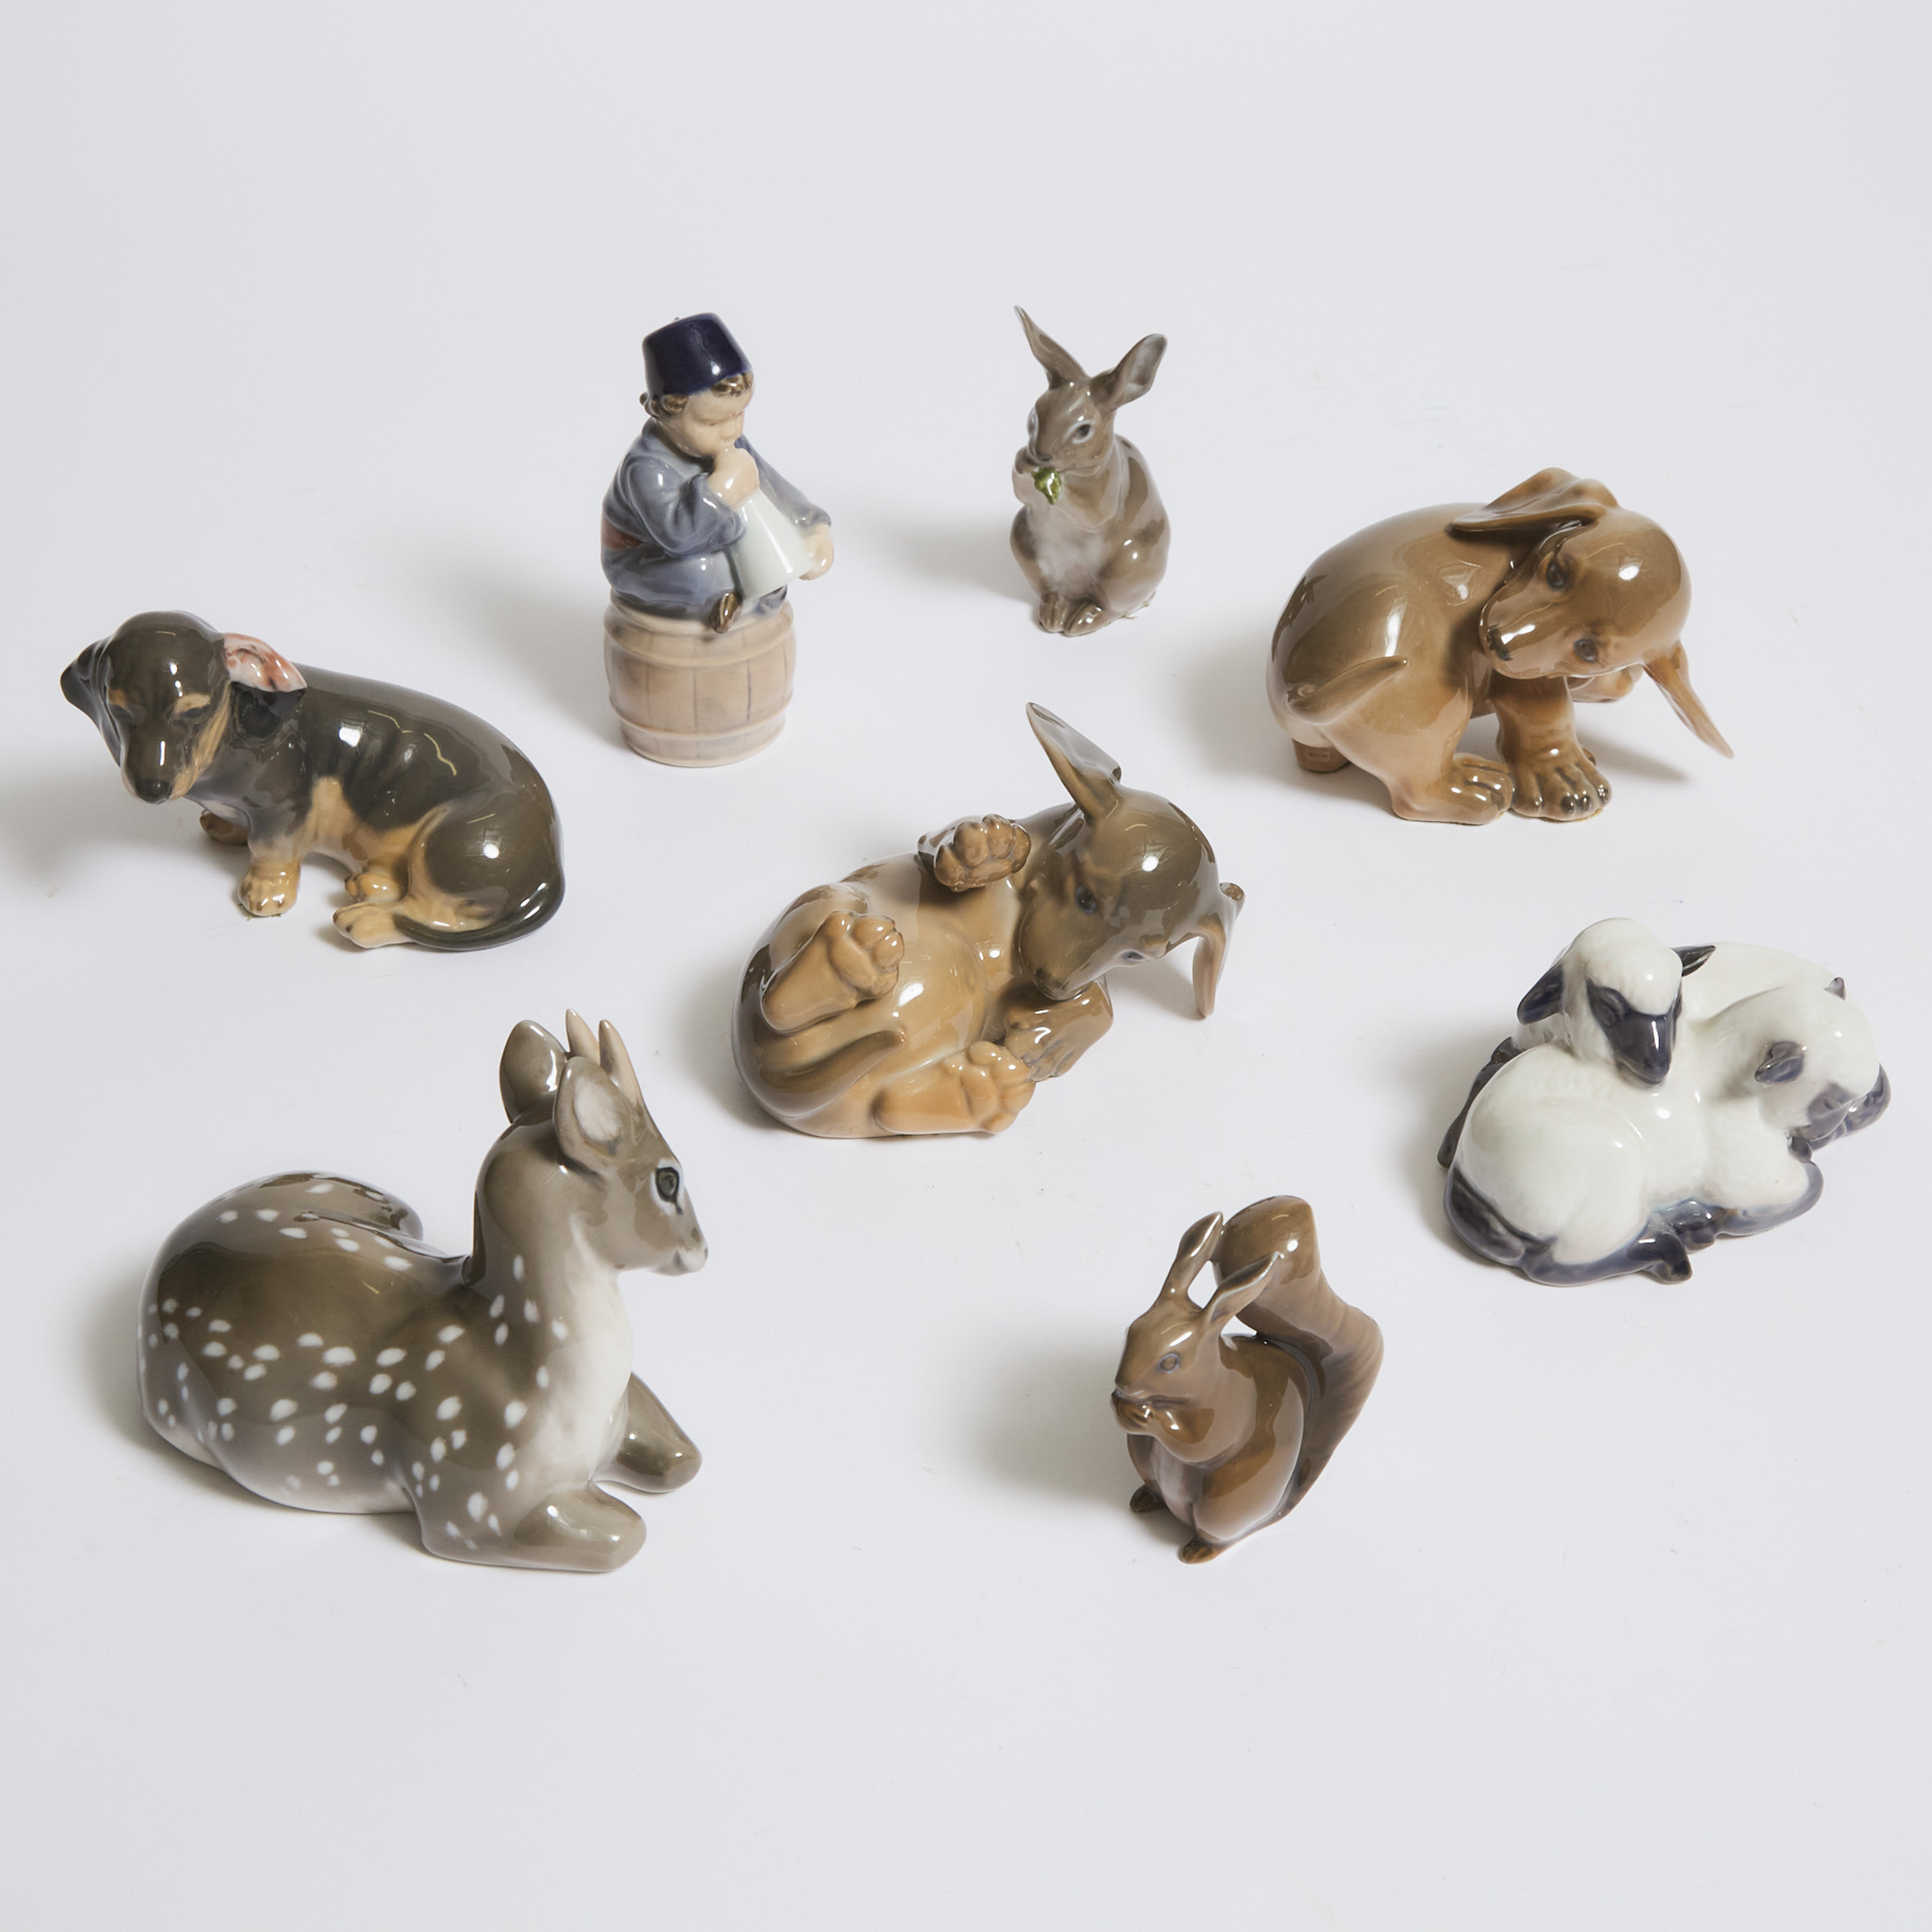 Royal Copenhagen Seated Boy and Seven Various Animal Models and Groups, 20th century